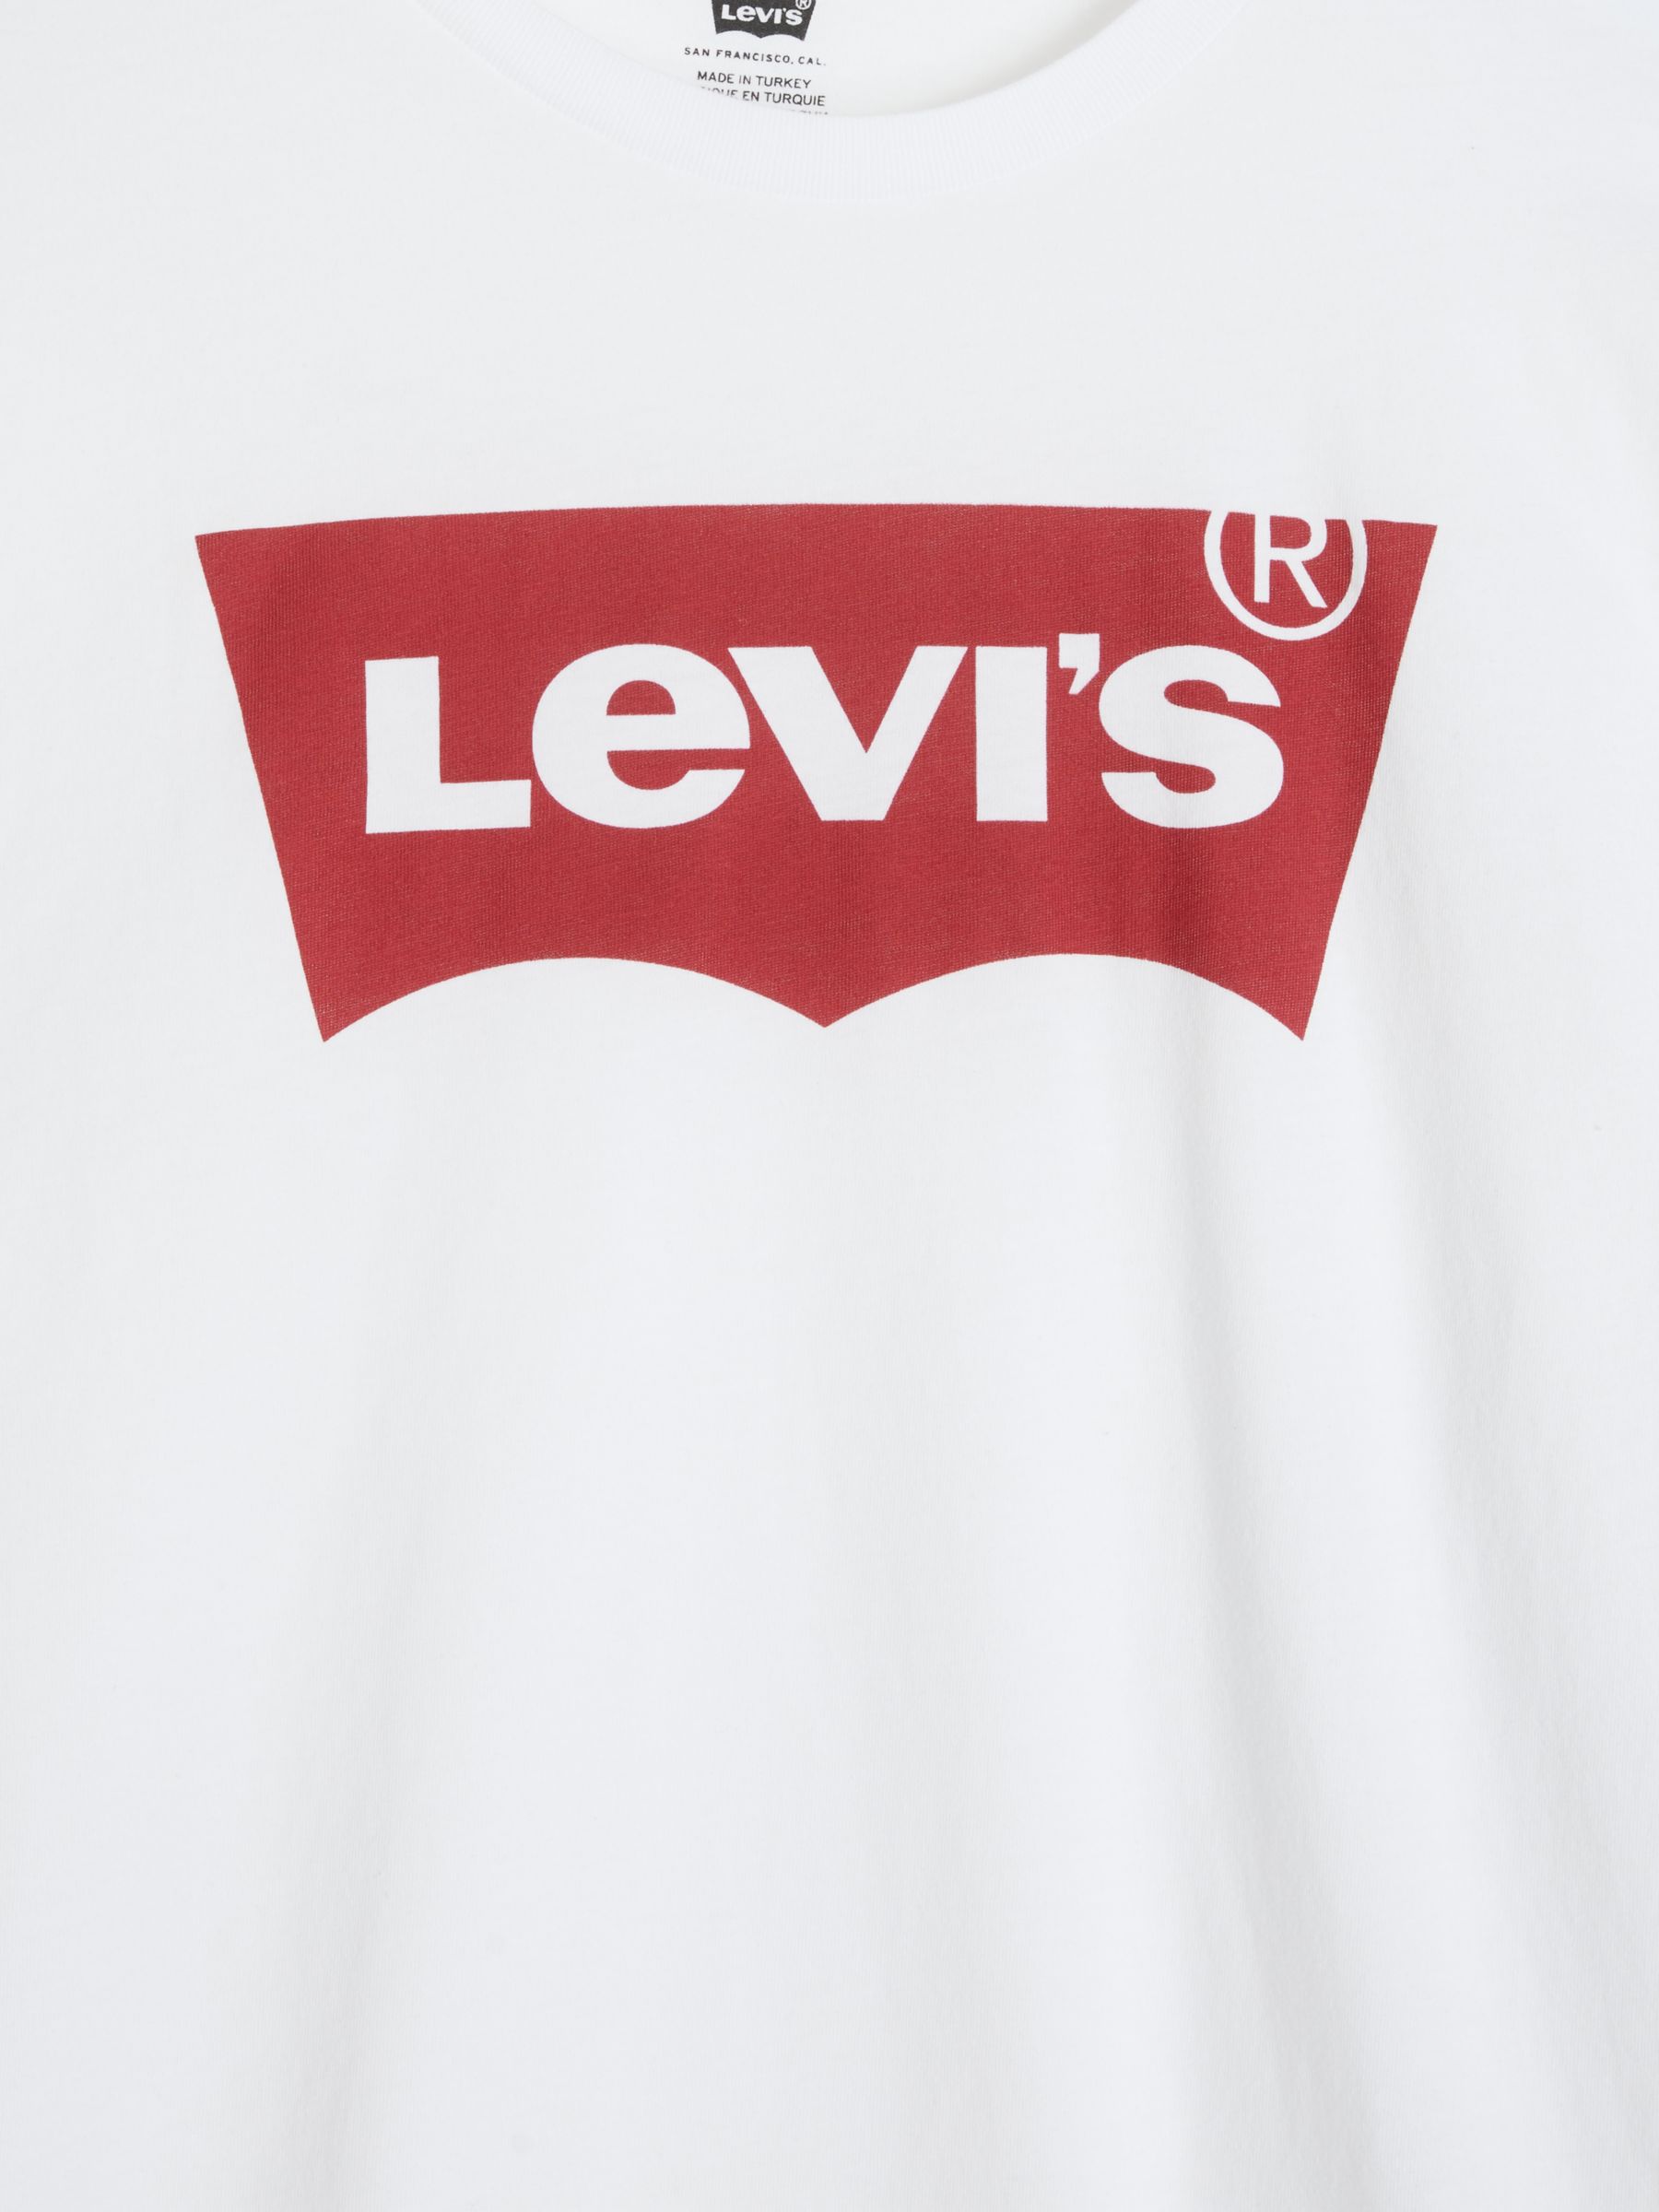 Levi's Batwing Graphic Long Sleeve Logo T-Shirt, White, S